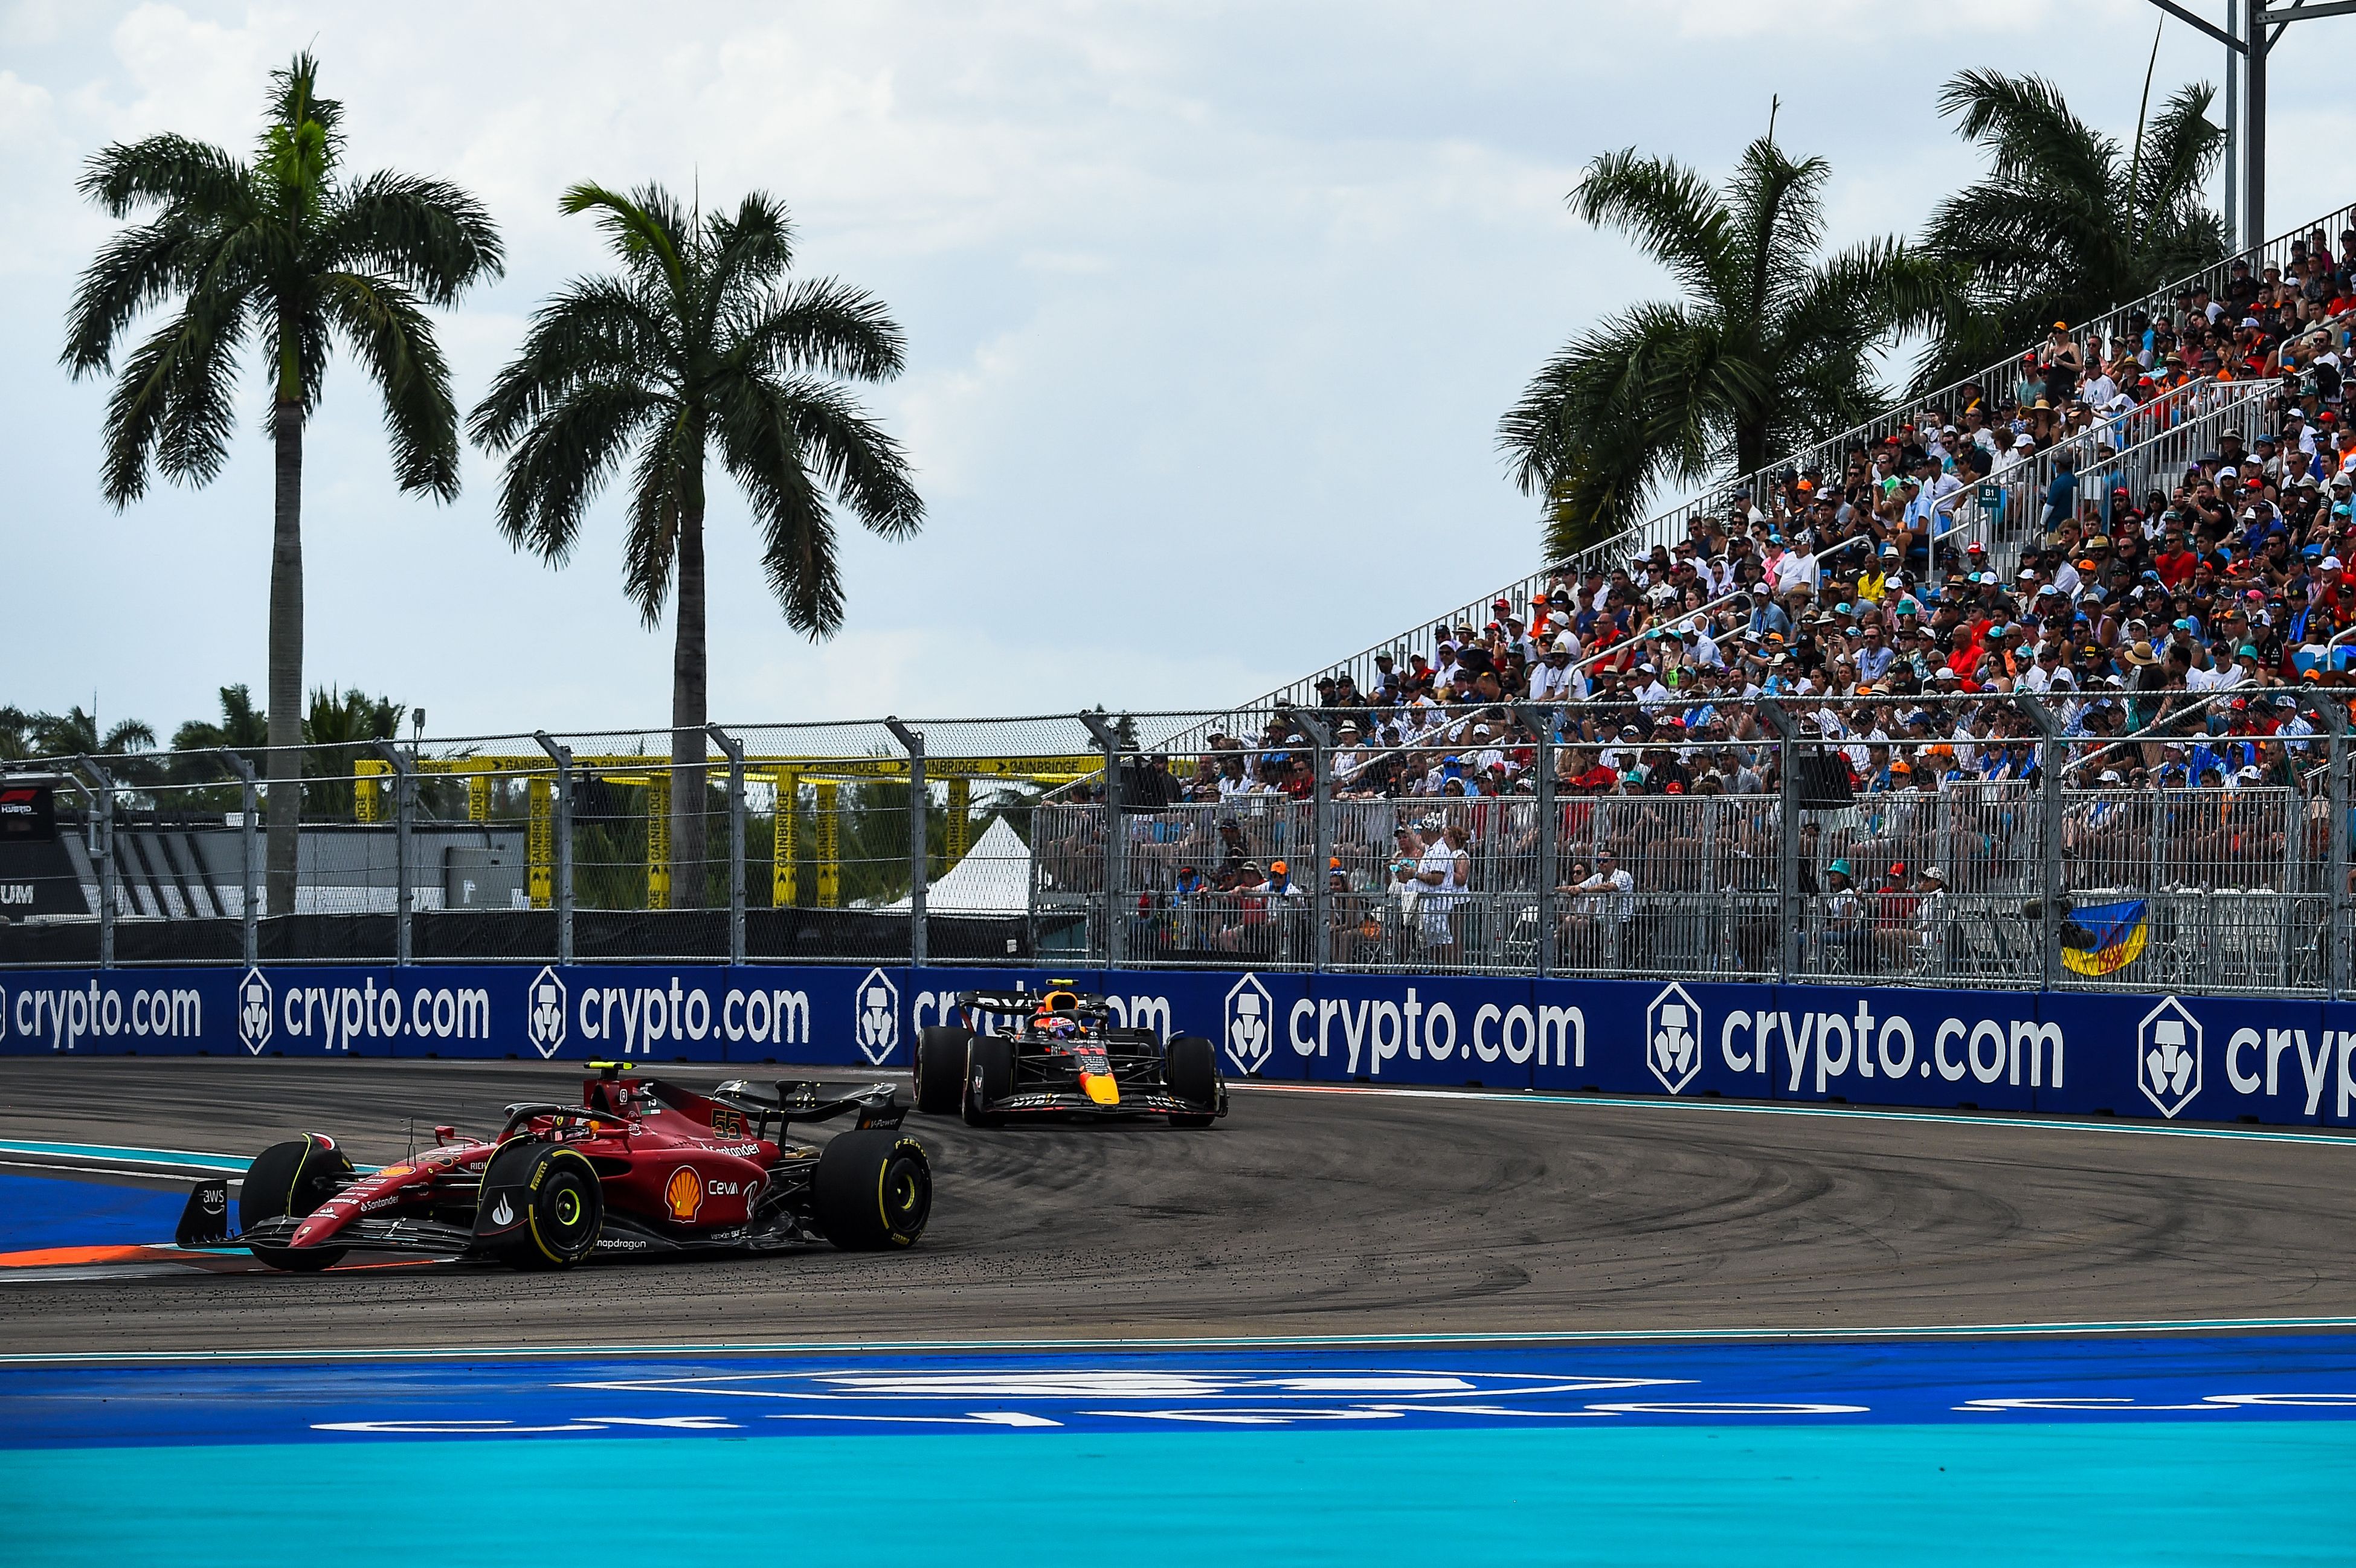 What We Learned from the Inaugural F1 Miami Grand Prix